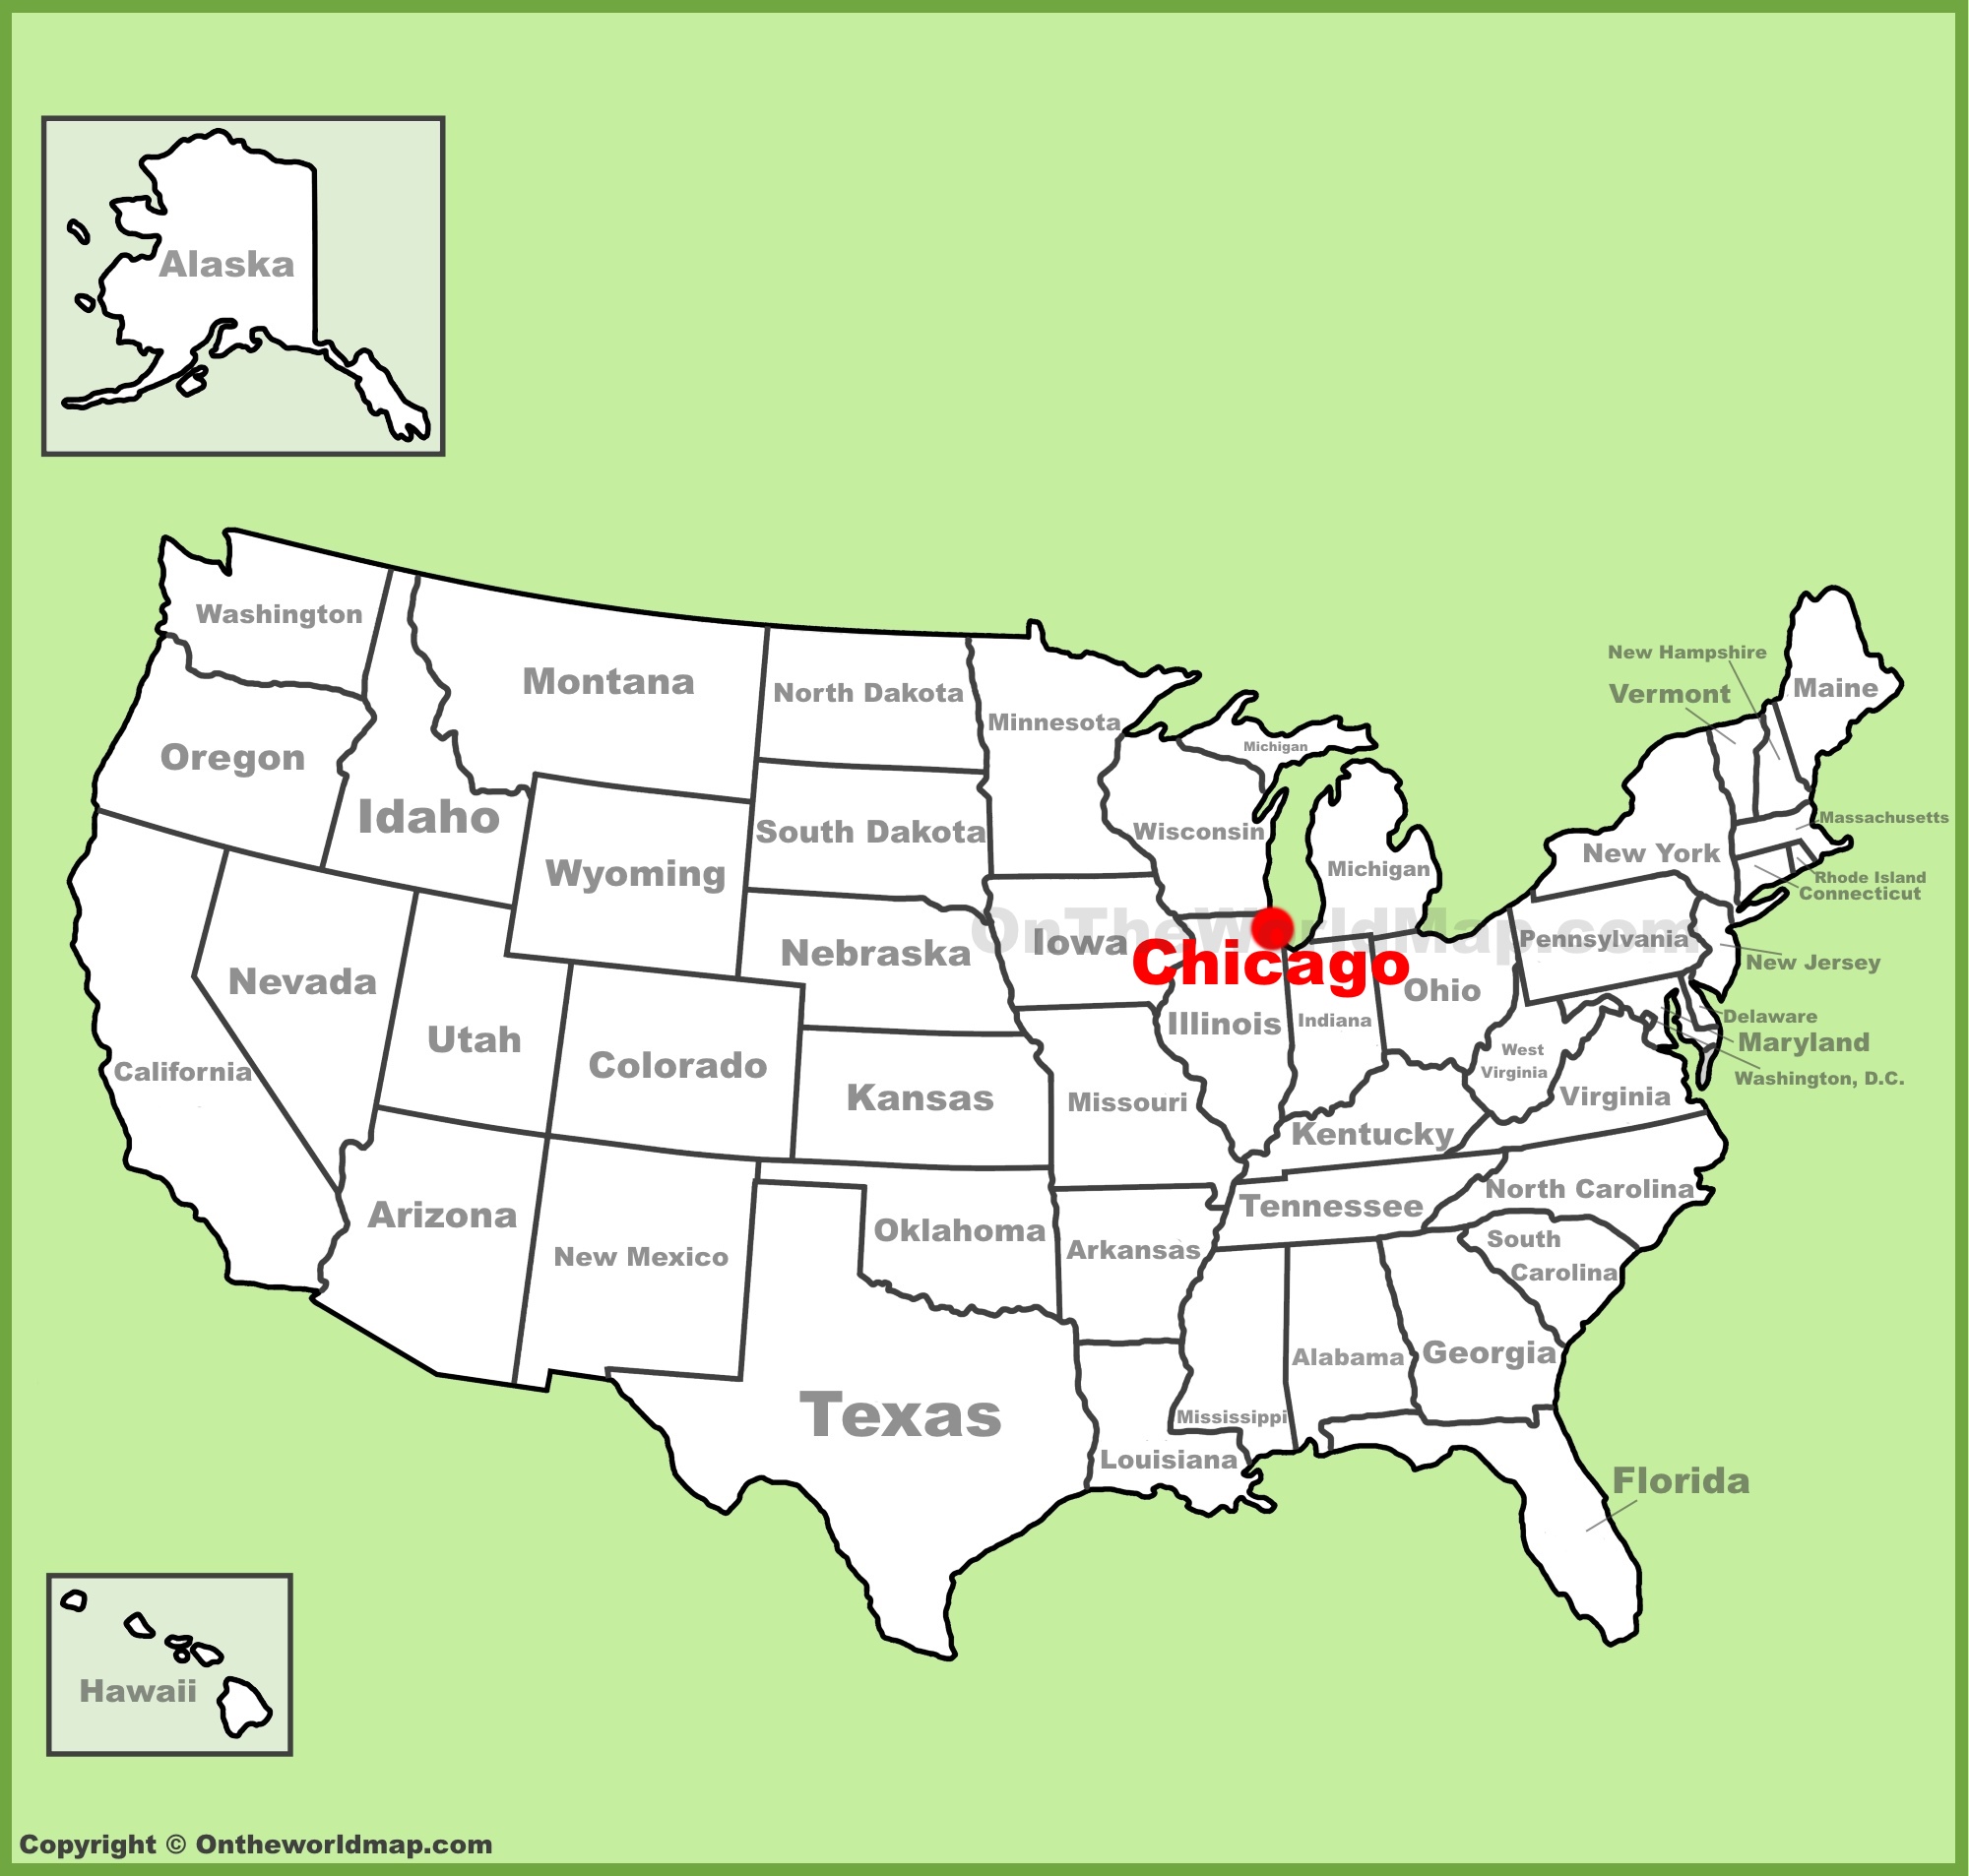 Chicago Location On The U S Map